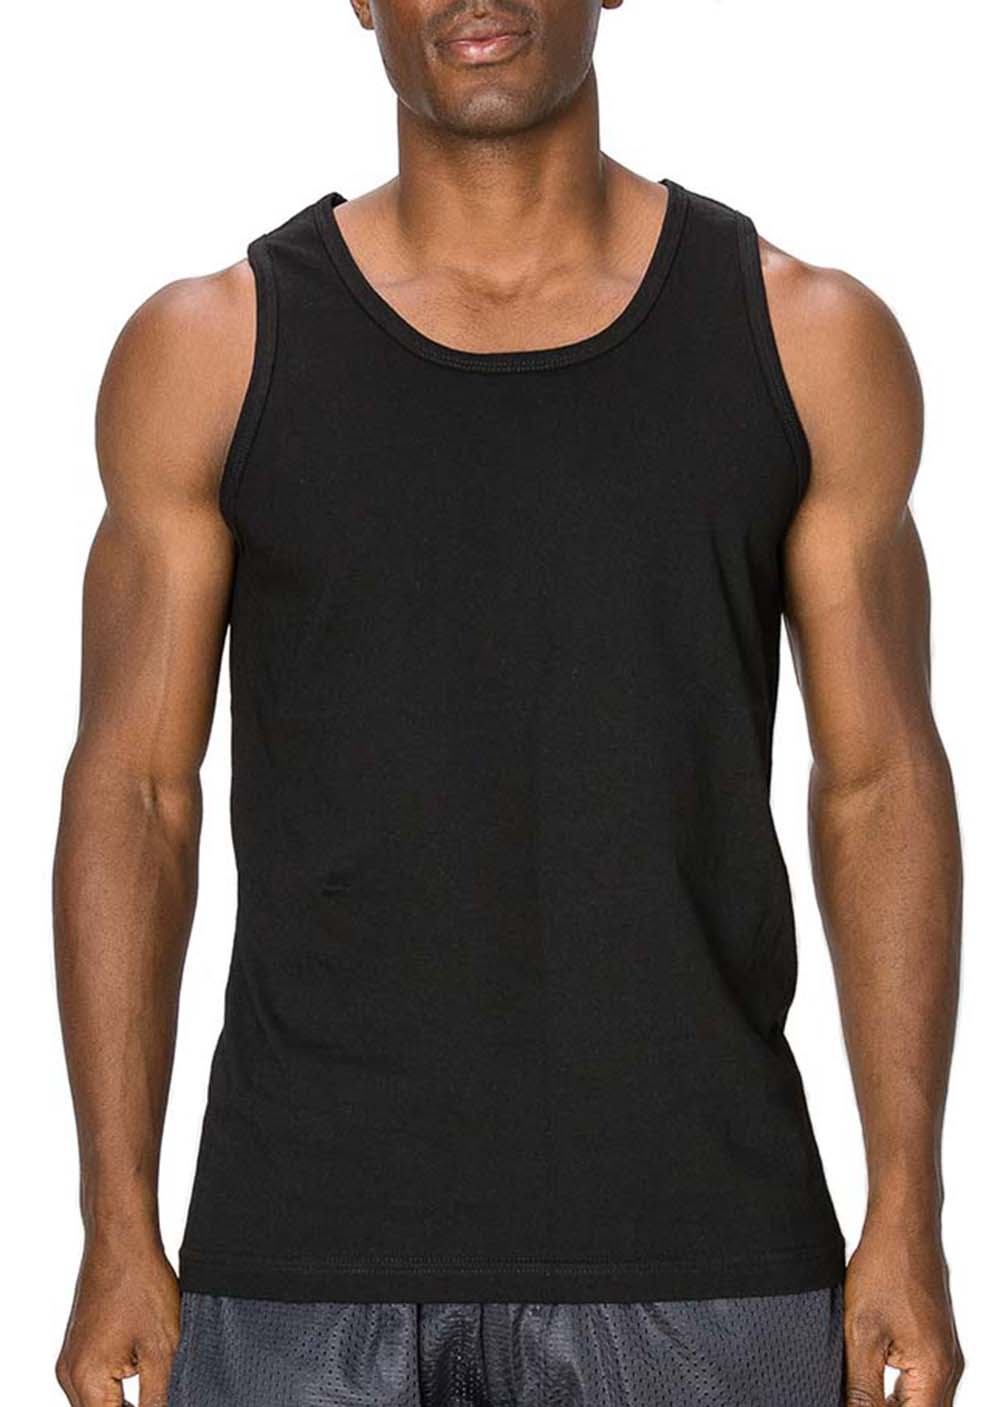 Versatile Black Tank Top: Wear alone or layer up. Sizes S-3X. Colors: White, Black, Heather Grey, Red, Royal, Navy, D Grey, Wood Camo, Desert Camo. Fabric: All-100% Cotton, H Grey-80% Cotton 20% Poly.